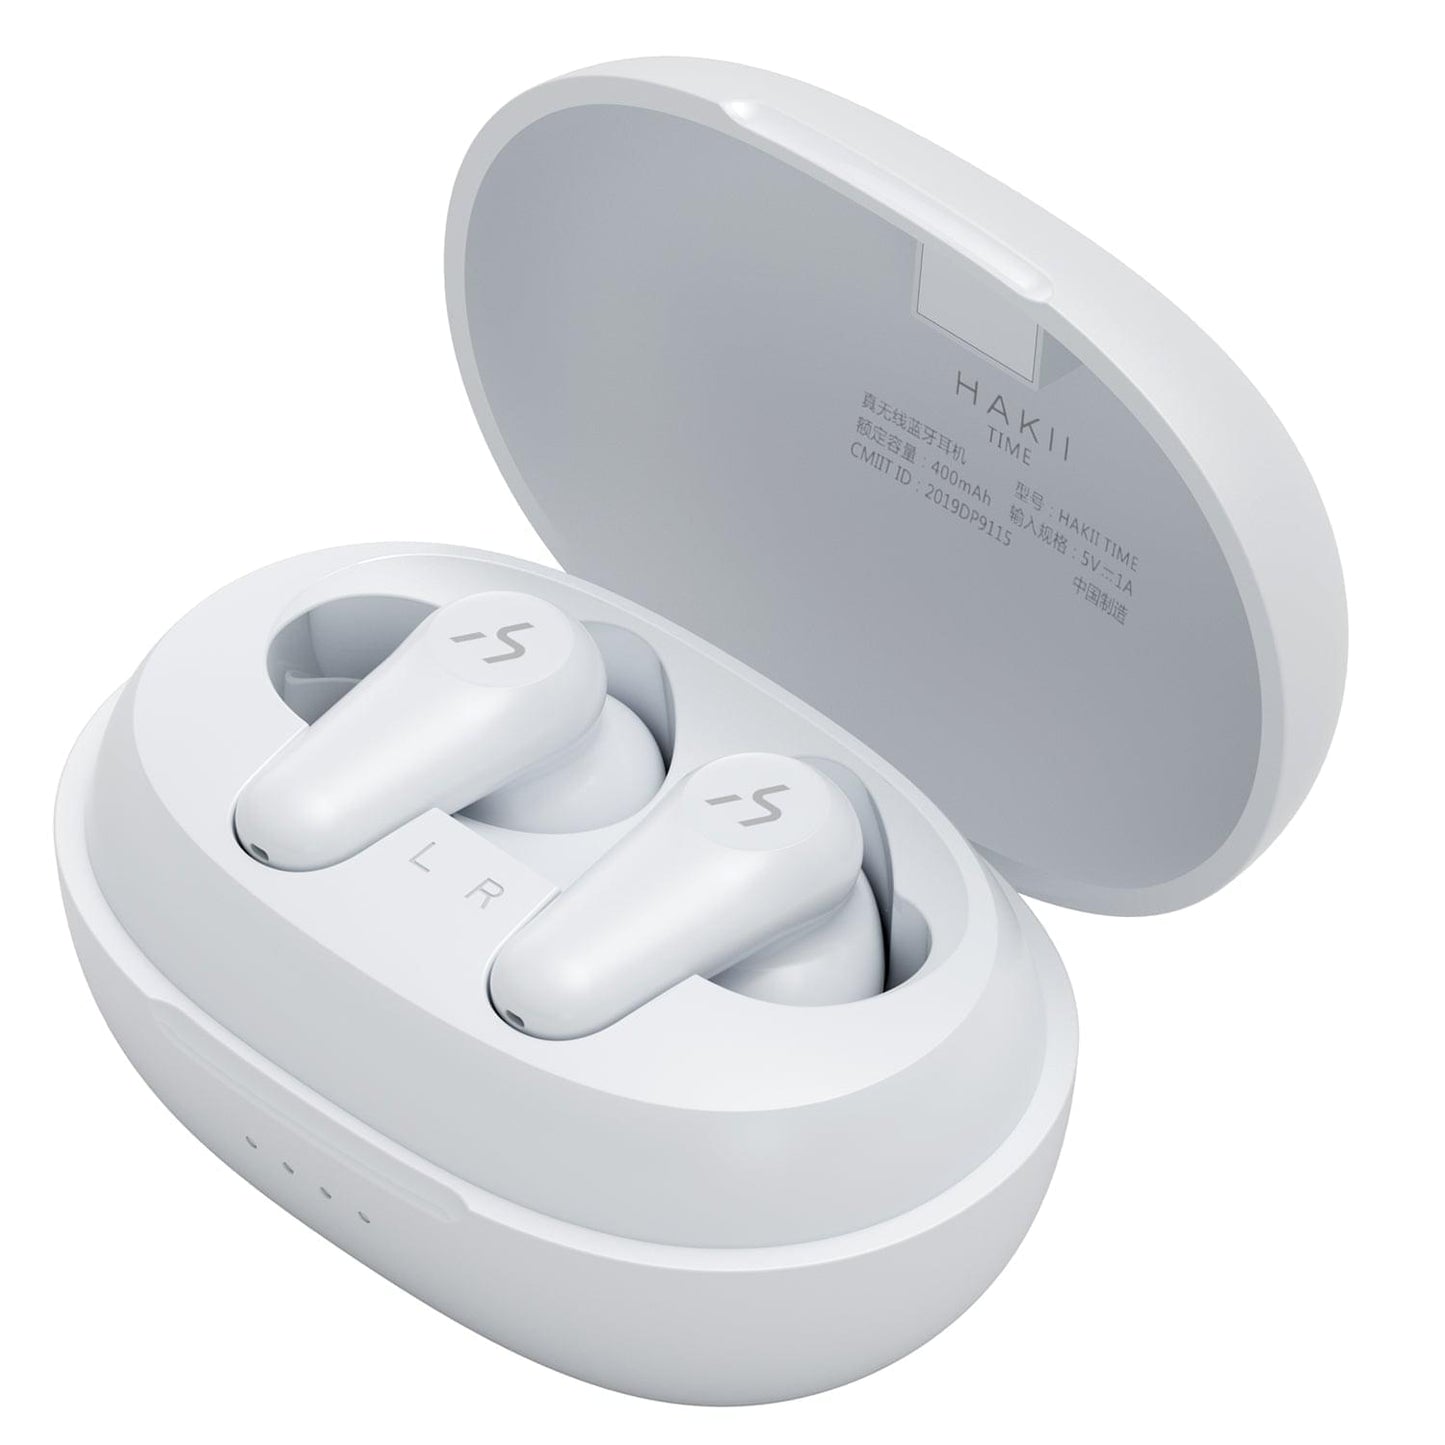 HAKII TIME Anc Noise Cancelling True Wireless Ohrhörer